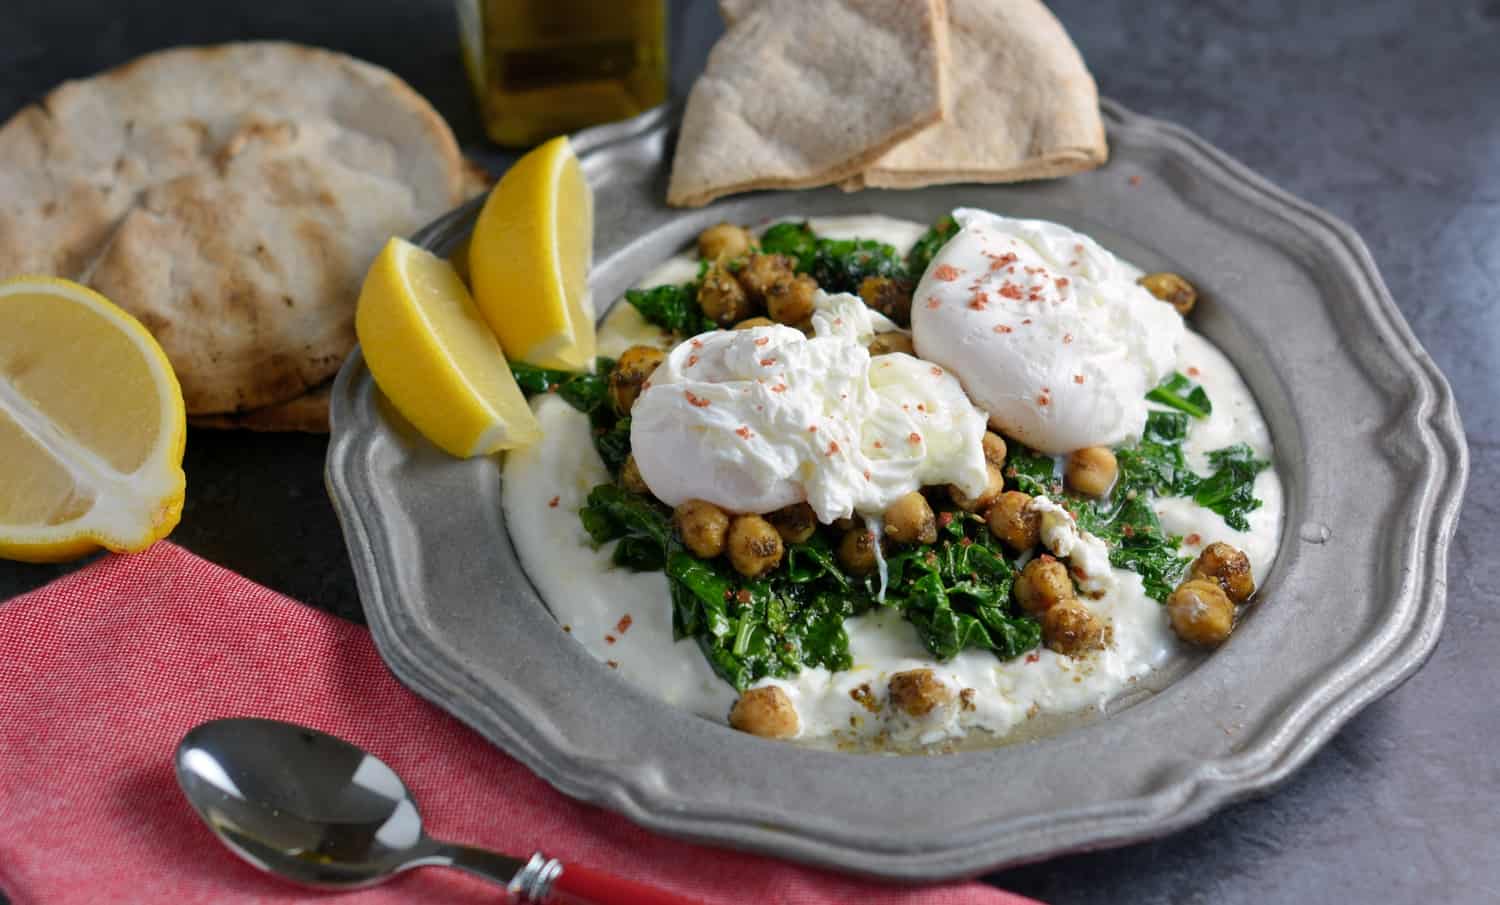 Za’atar Chickpeas and Poached Eggs is a refreshing, health and gluten-free breakfast option. Lemon zested yogurt sauce, za’atar spiced chickpeas, wilted spinach and poached eggs sprinkled with pink sea salt.